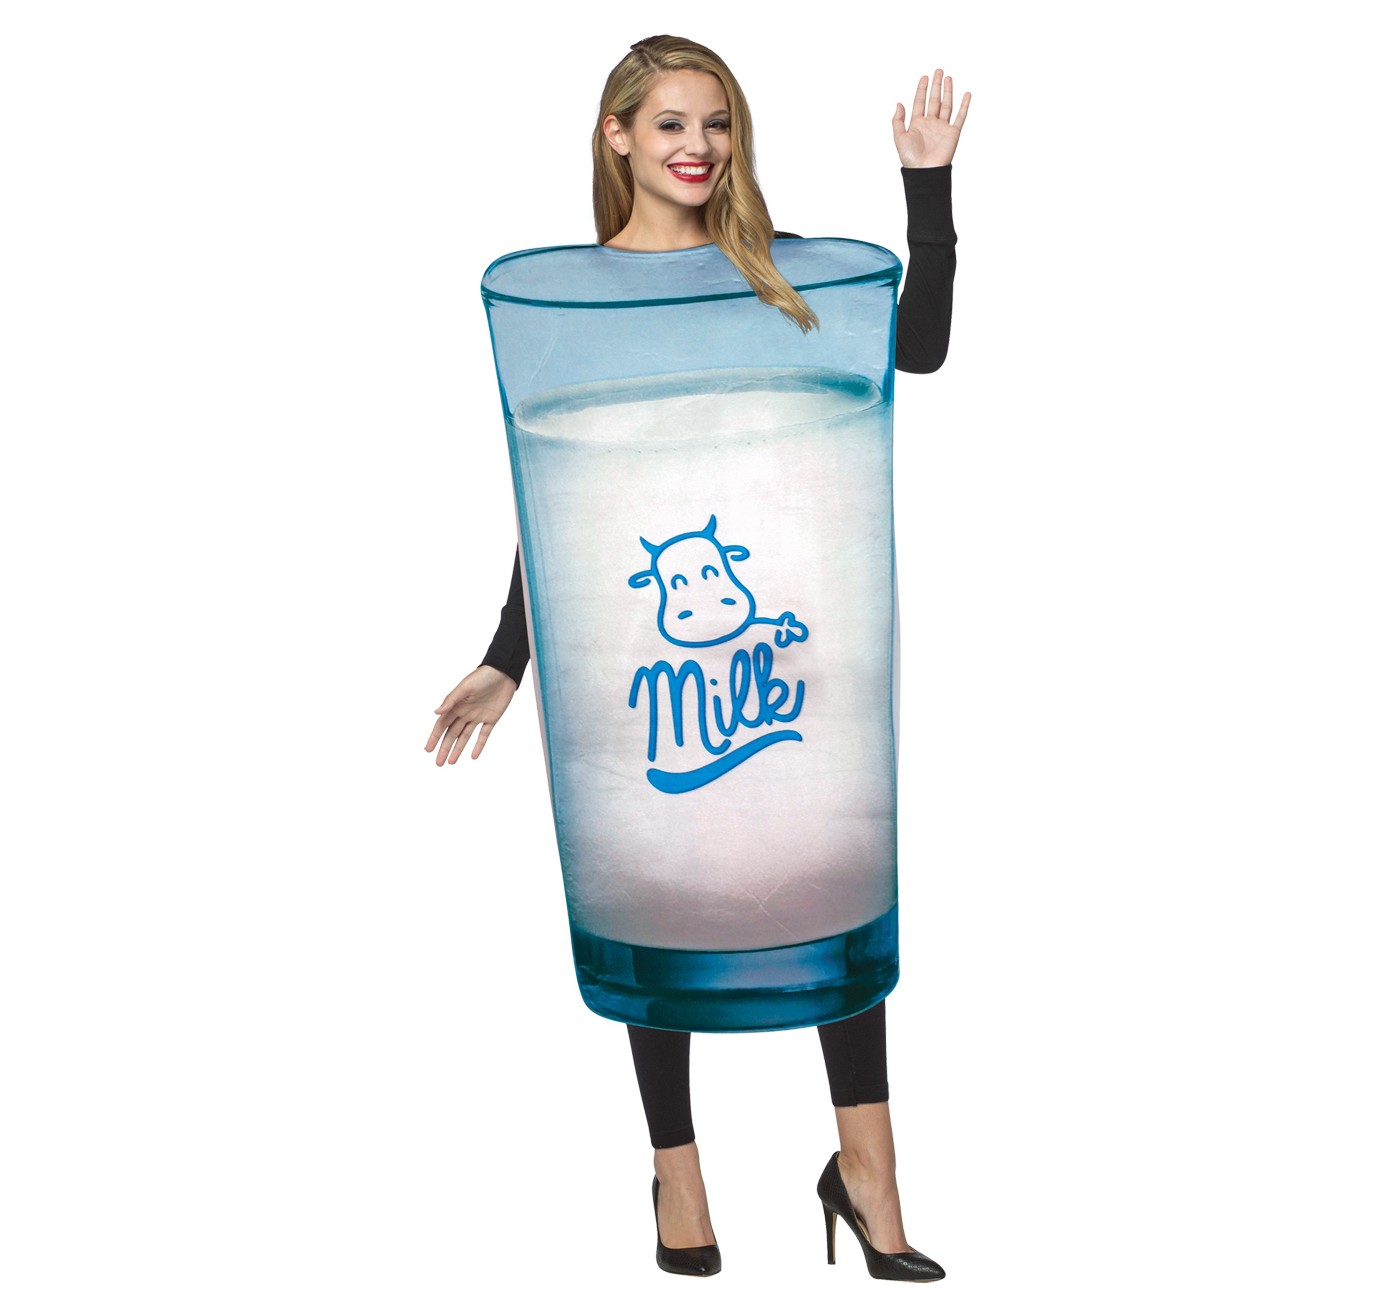 Get Real Glass of Milk Adult Costume - image 1 of 1